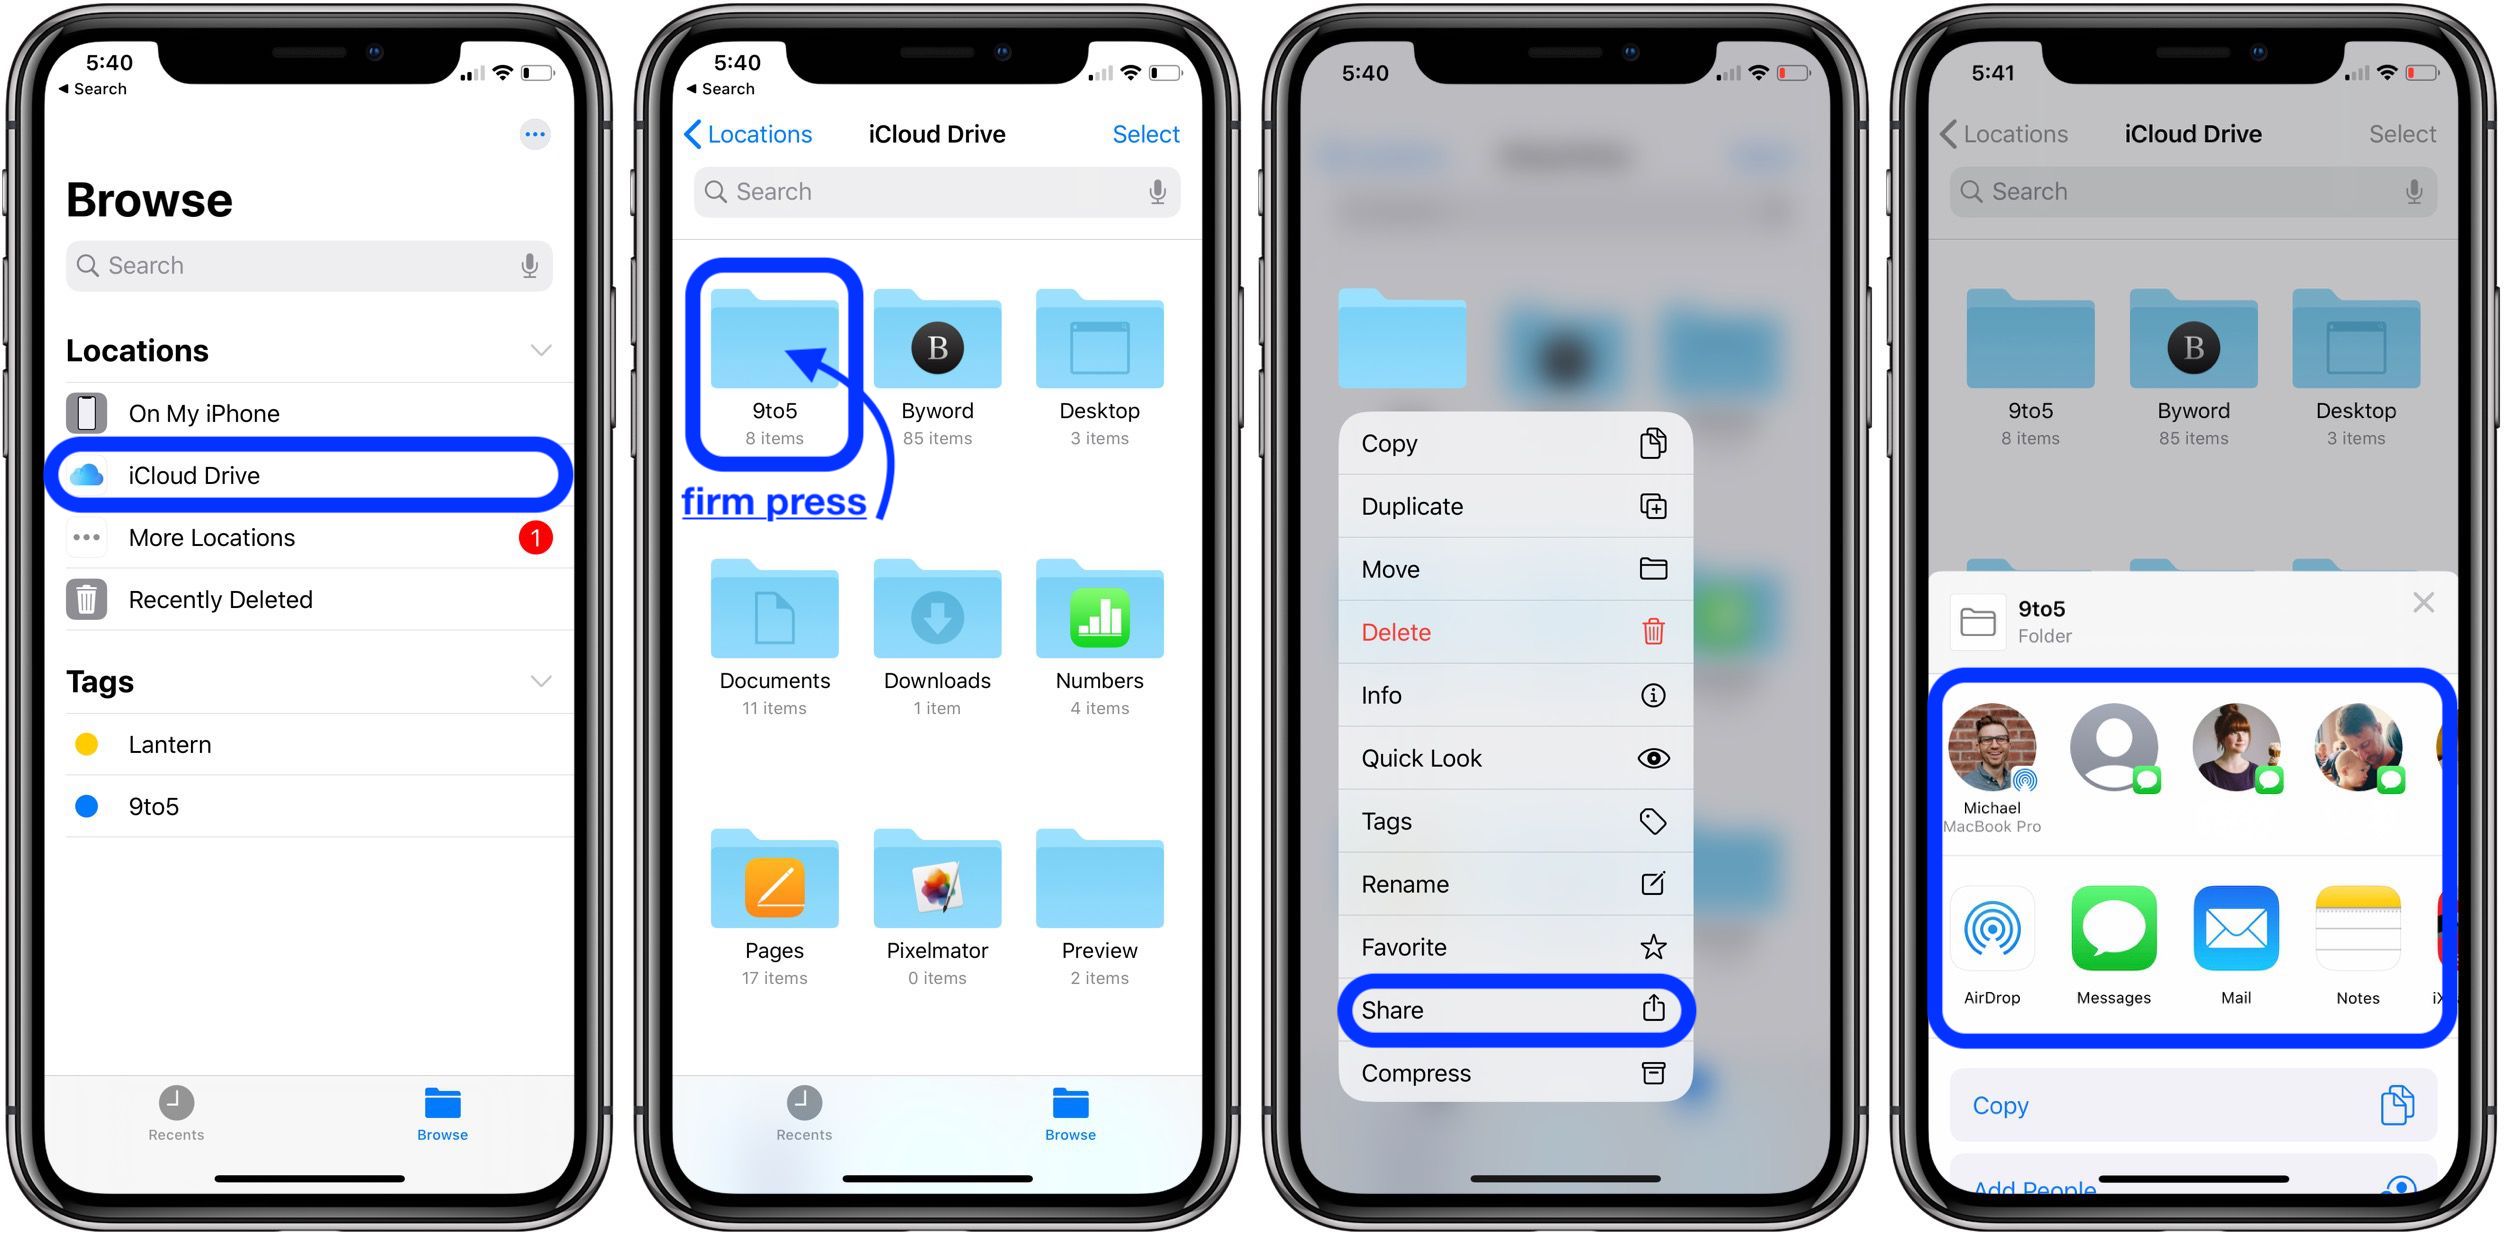 how to get pictures from icloud drive to iphone